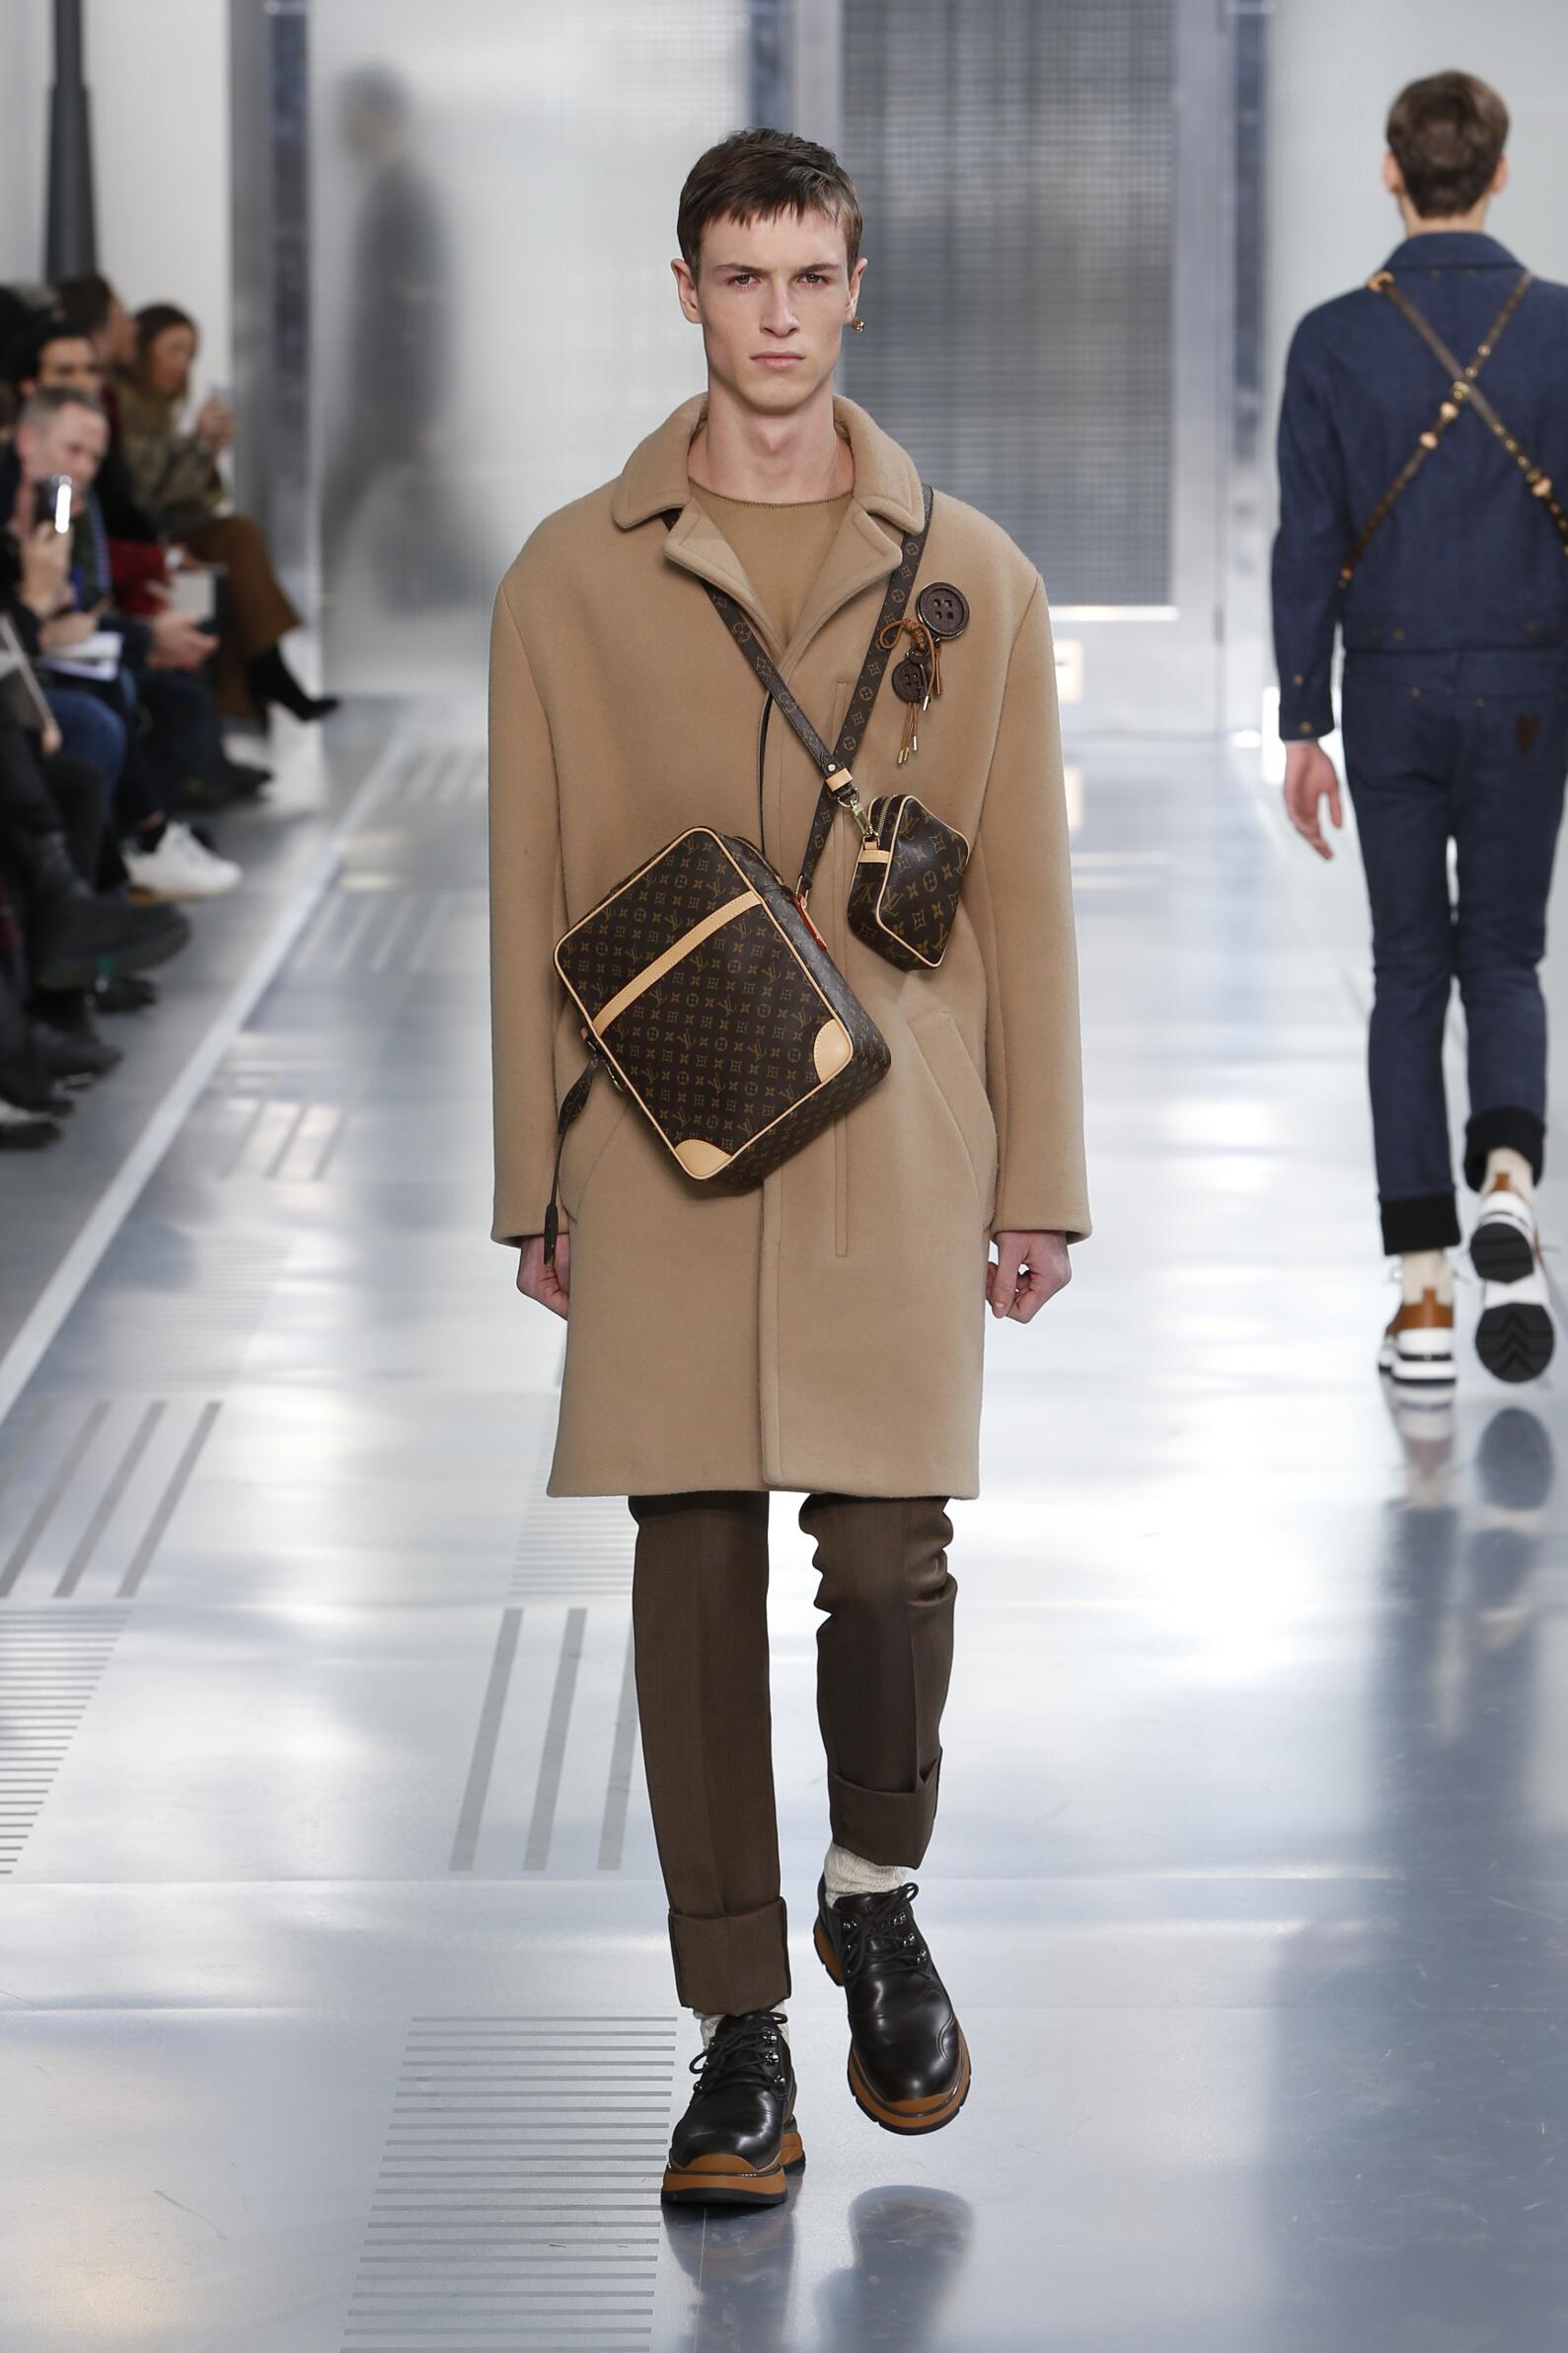 LOUIS VUITTON FALL WINTER 2015-16 MEN'S COLLECTION | The Skinny Beep